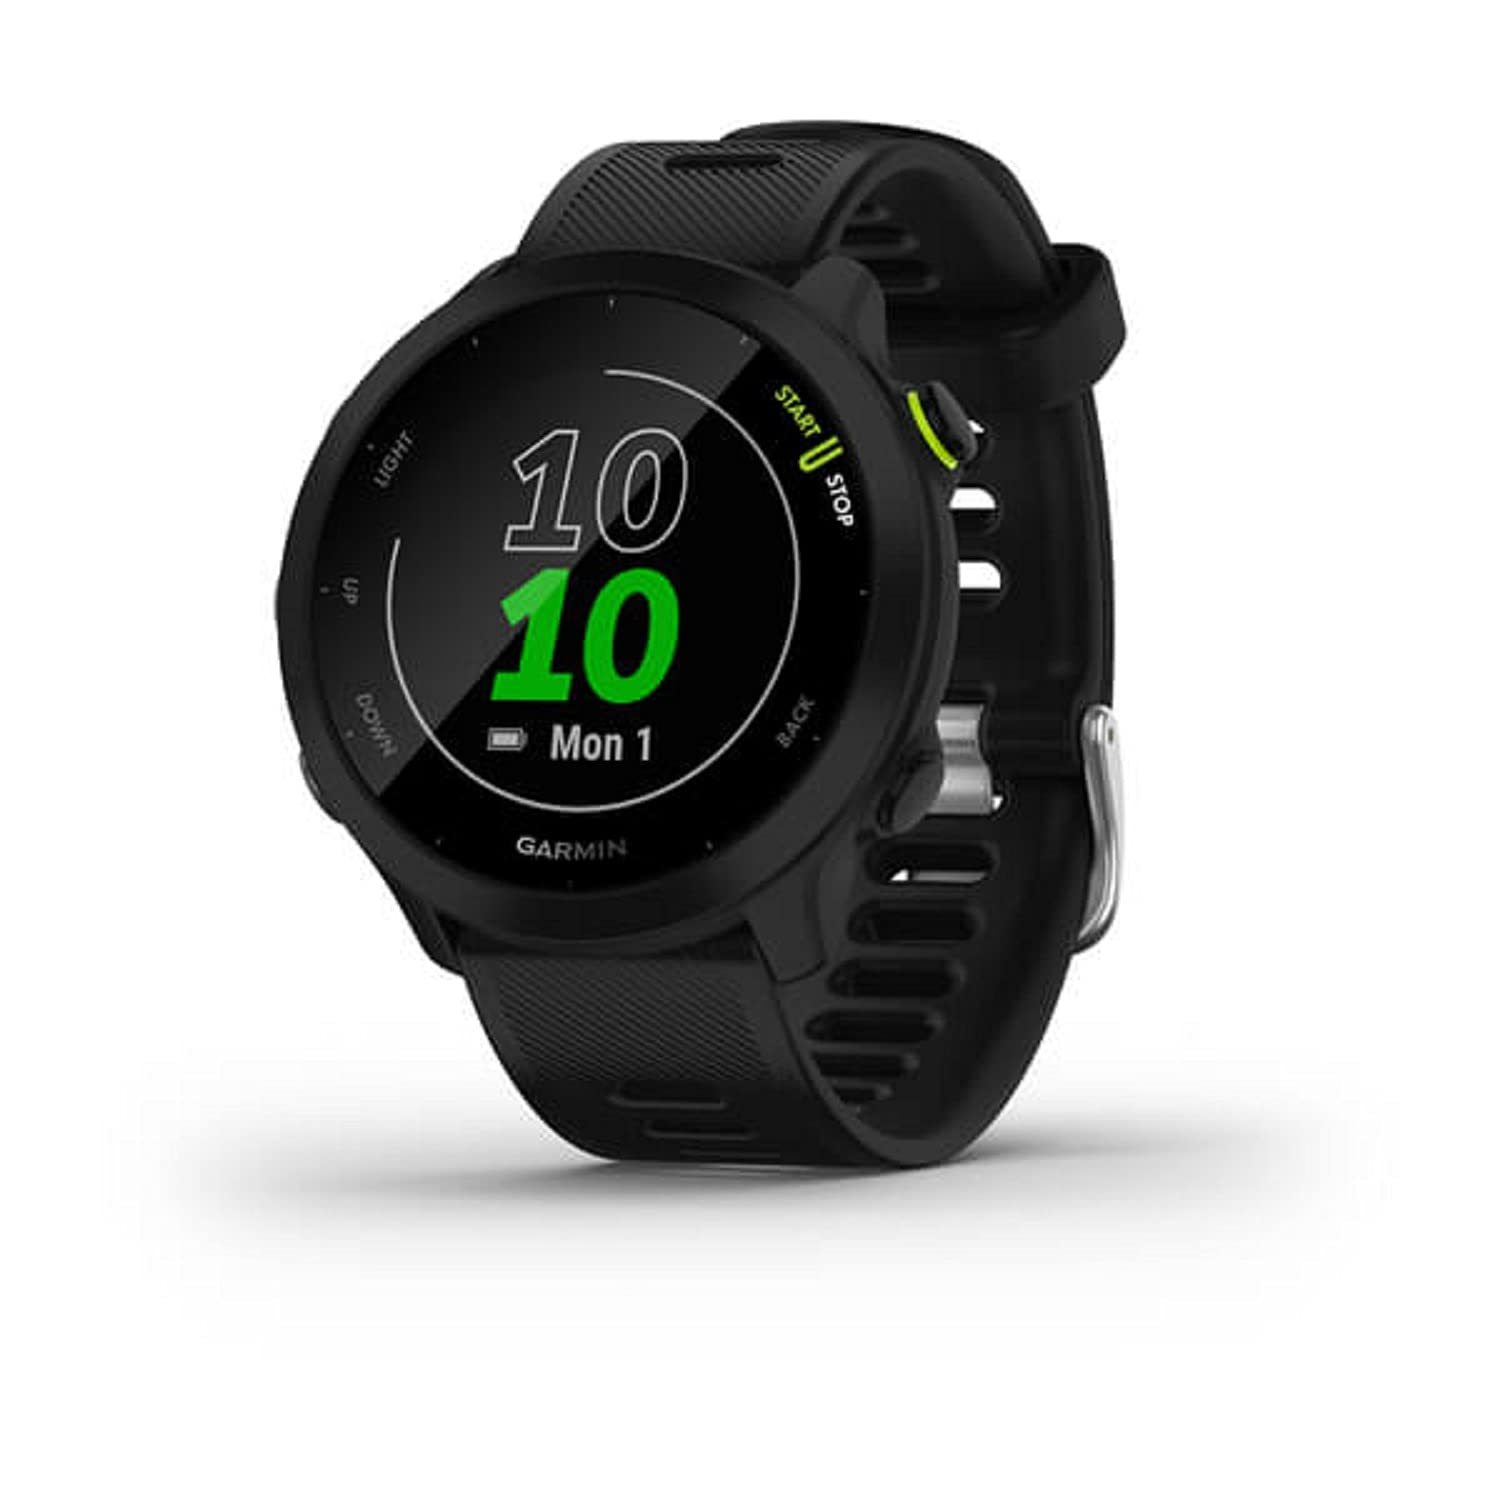 Garmin 010-02562-00 Forerunner 55, GPS Running Watch with Daily Suggested Workou - $278.99